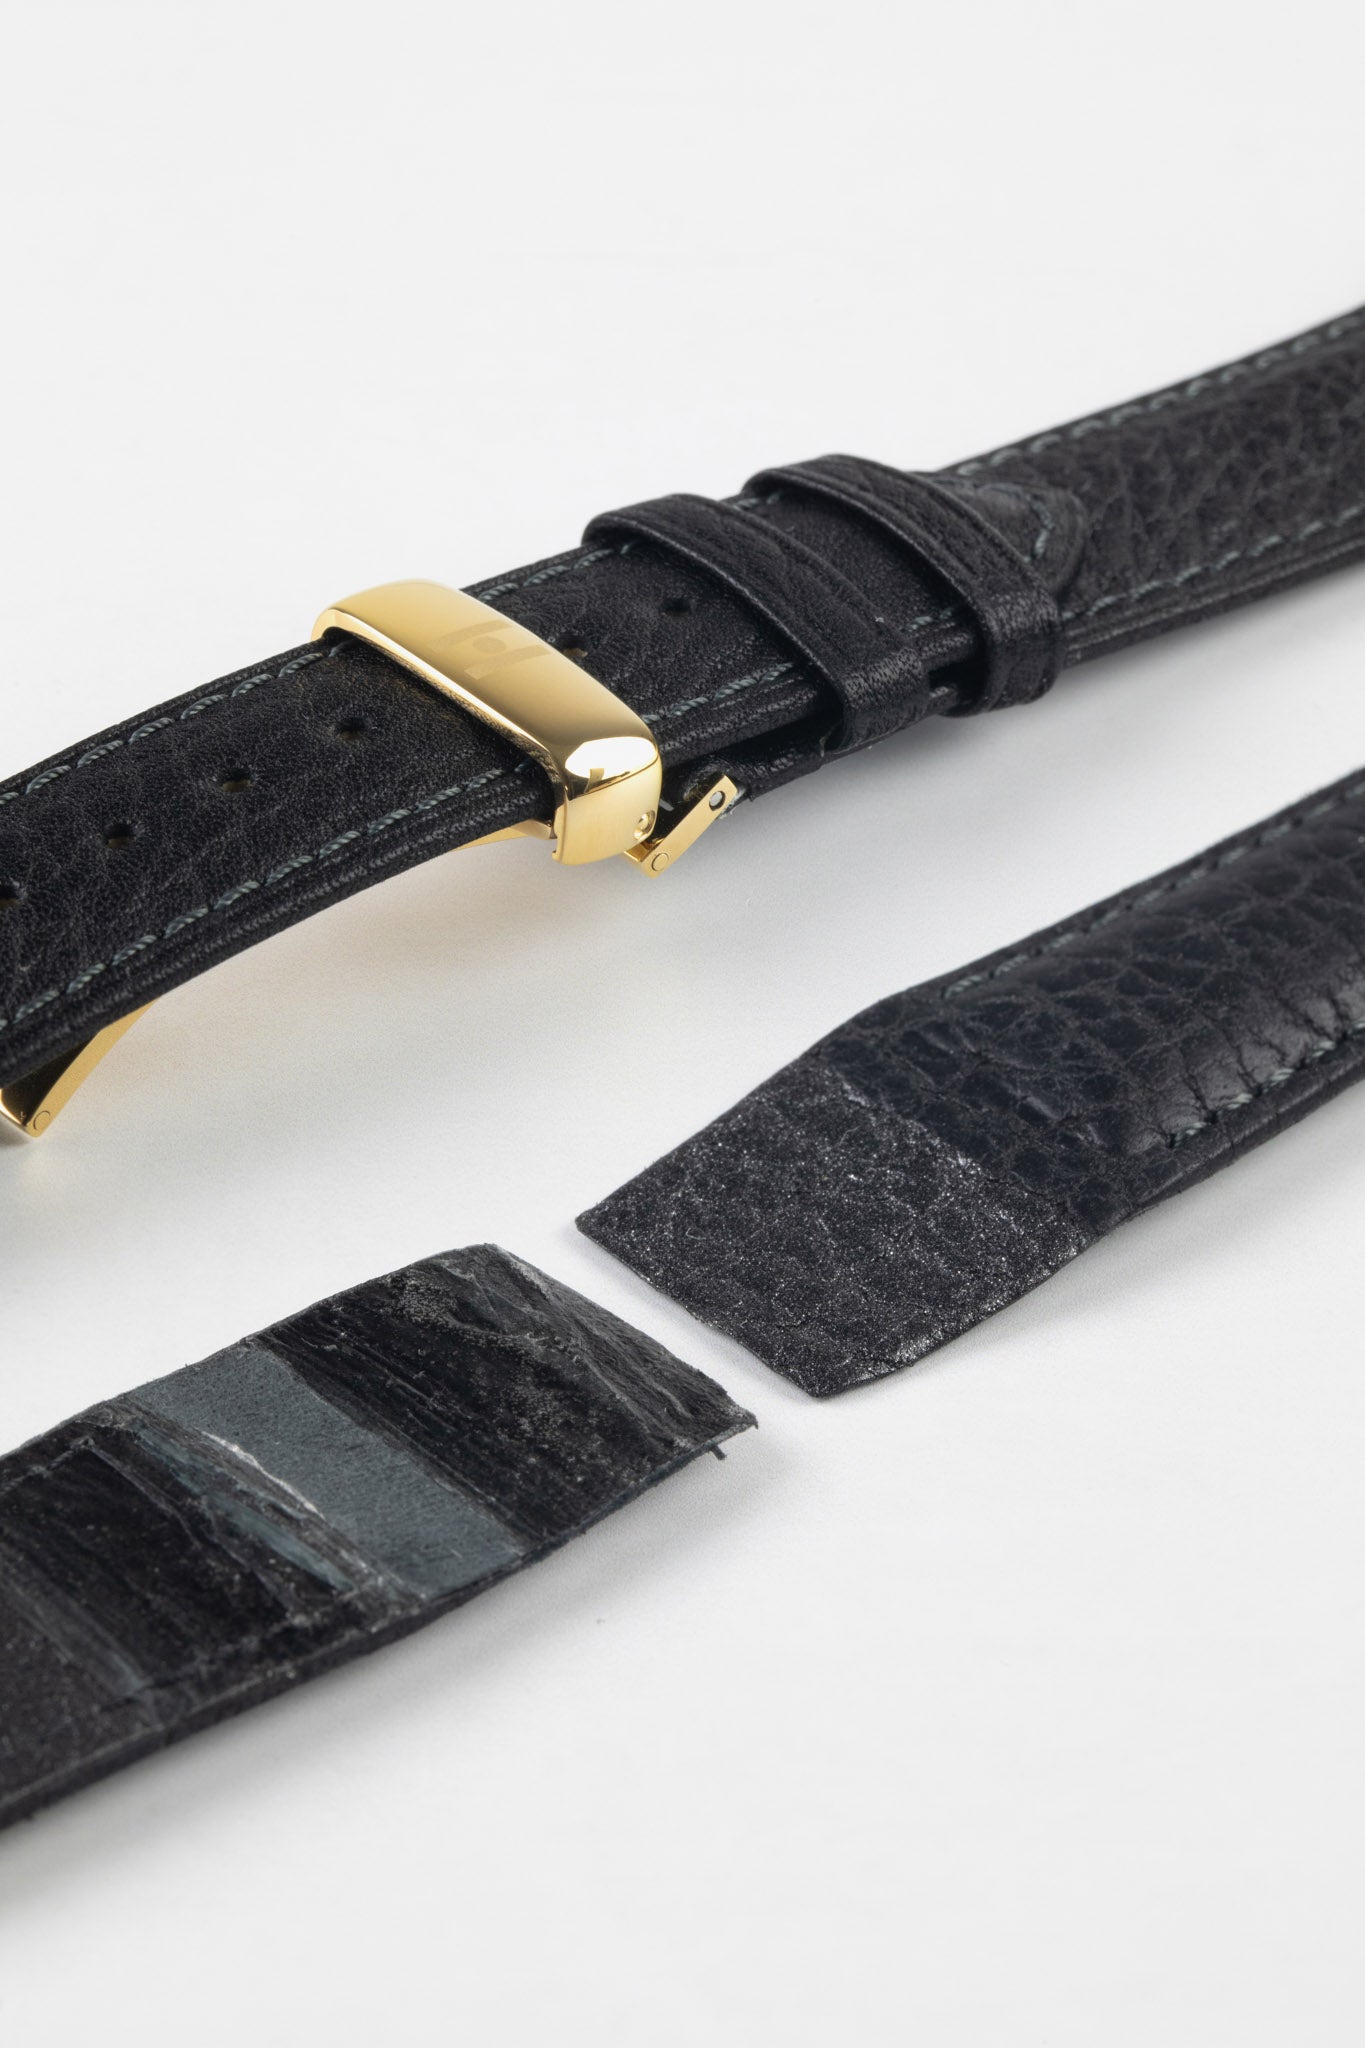 Hirsch Camelgrain Hypoallergenic Leather Watch Strap - Black Band / Gold Buckle - M - 20mm - Open Ended, Adult Unisex, Size: Medium - 20mm - Open